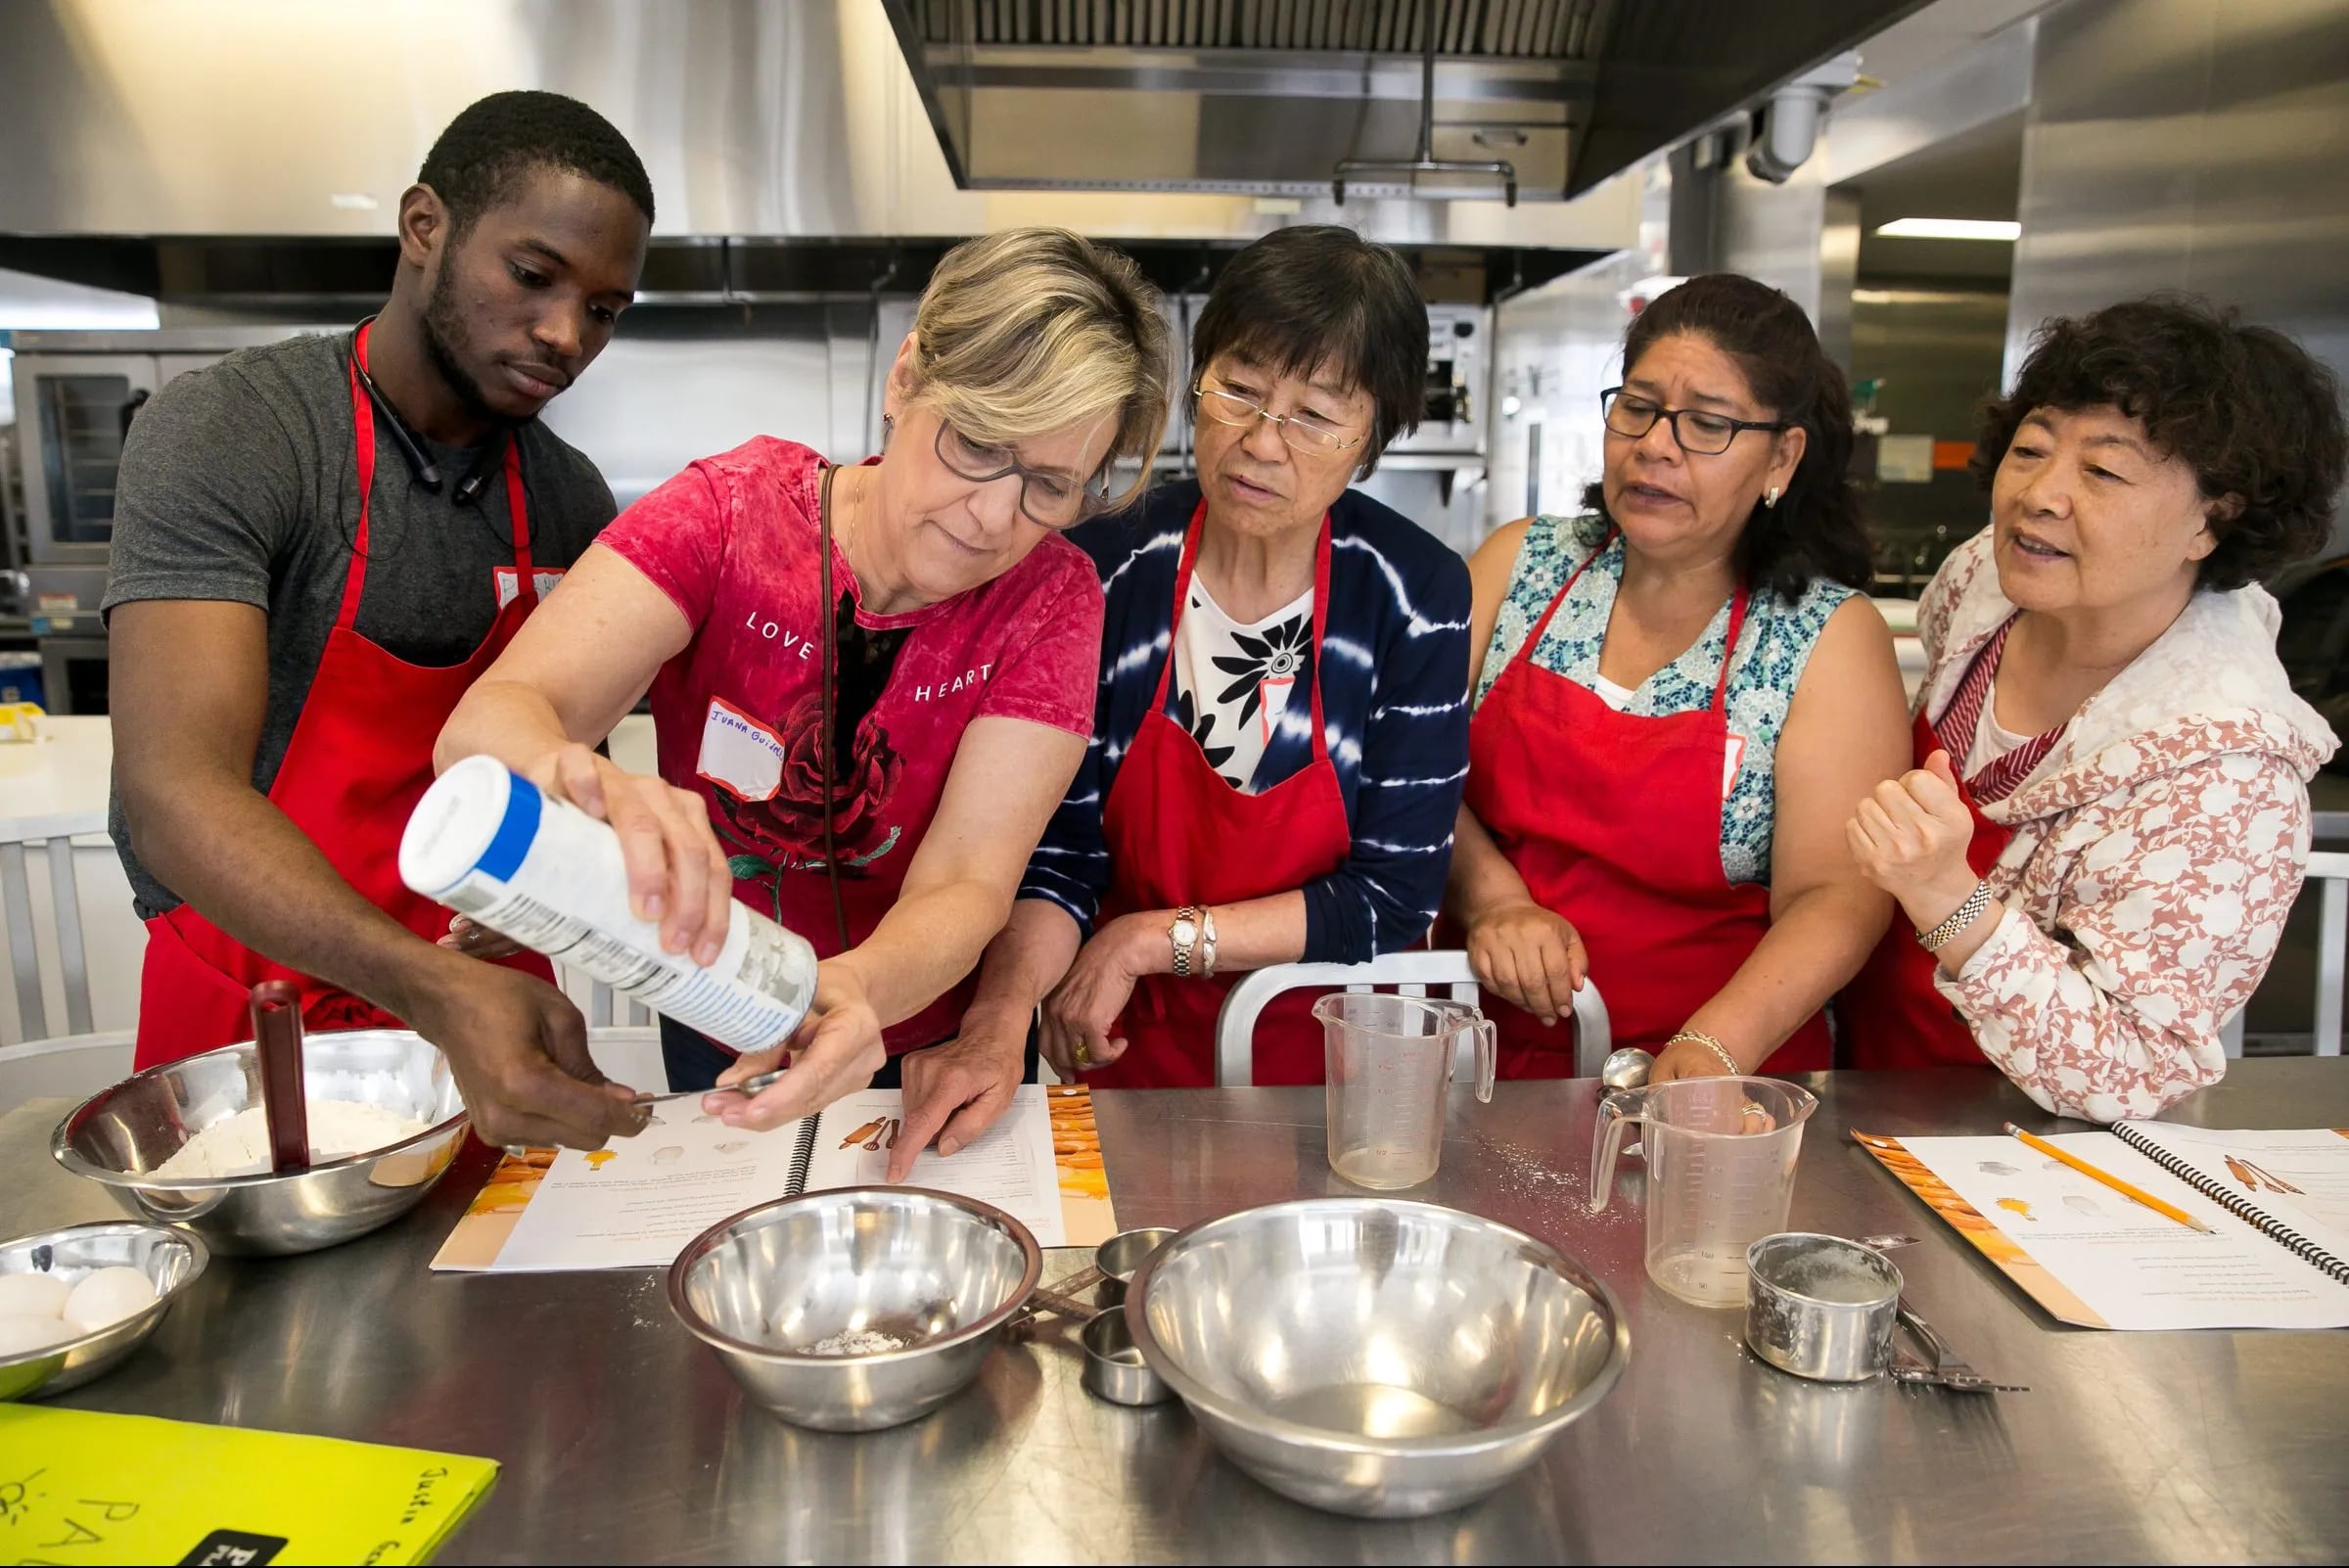 (L to R) Mamadou Hady Barry from Guinea, Ivana Guidelli from Brazil, Jiyun Li from China, Gloria Conchola from Mexico and Yu Qi from China collaborate on a project at the Free Library that uses cooking Teaching English to New Immigrants, at the Culinary Knowledge Center, Philadelphia Central Library, July 3, 2018.